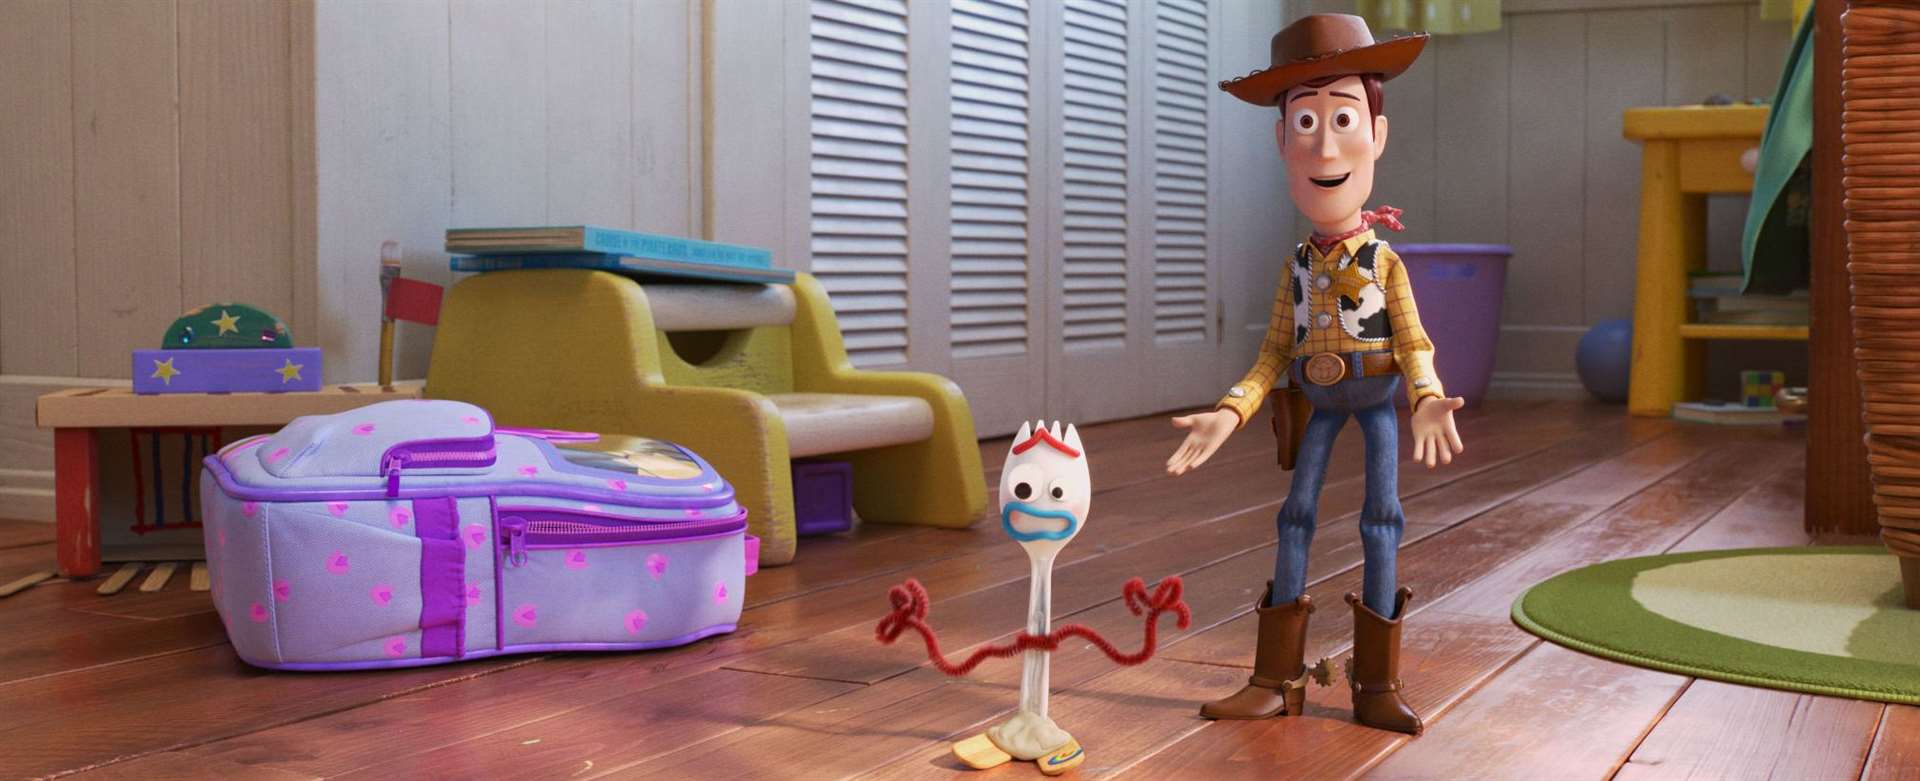 Woody (Tom Hanks) and Forky (voiced by Tony Hale) in Toy Story 4 Picture: Disney Pixar